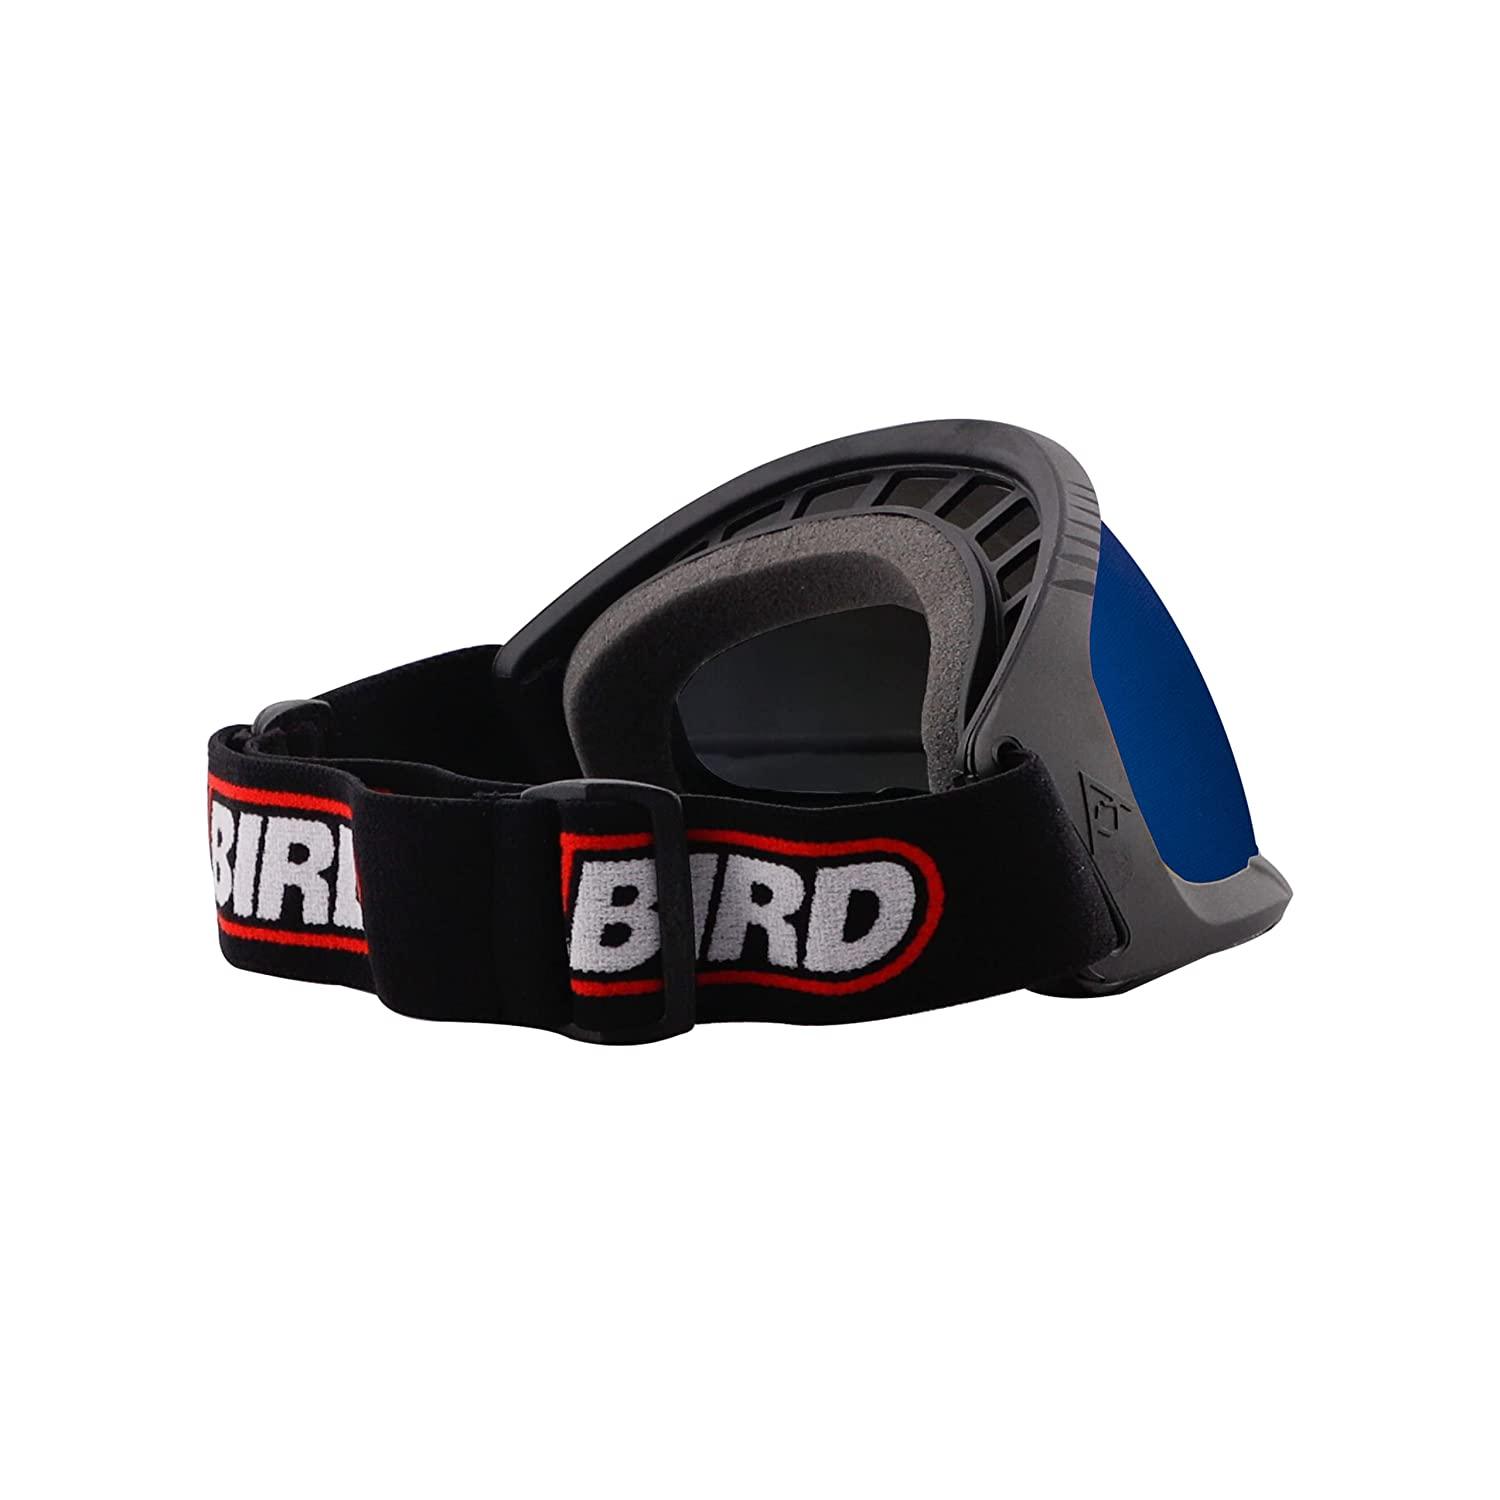 Steelbird Unisex Eye Protection Riding Glasses (Pack of 1) (Black with Blue)